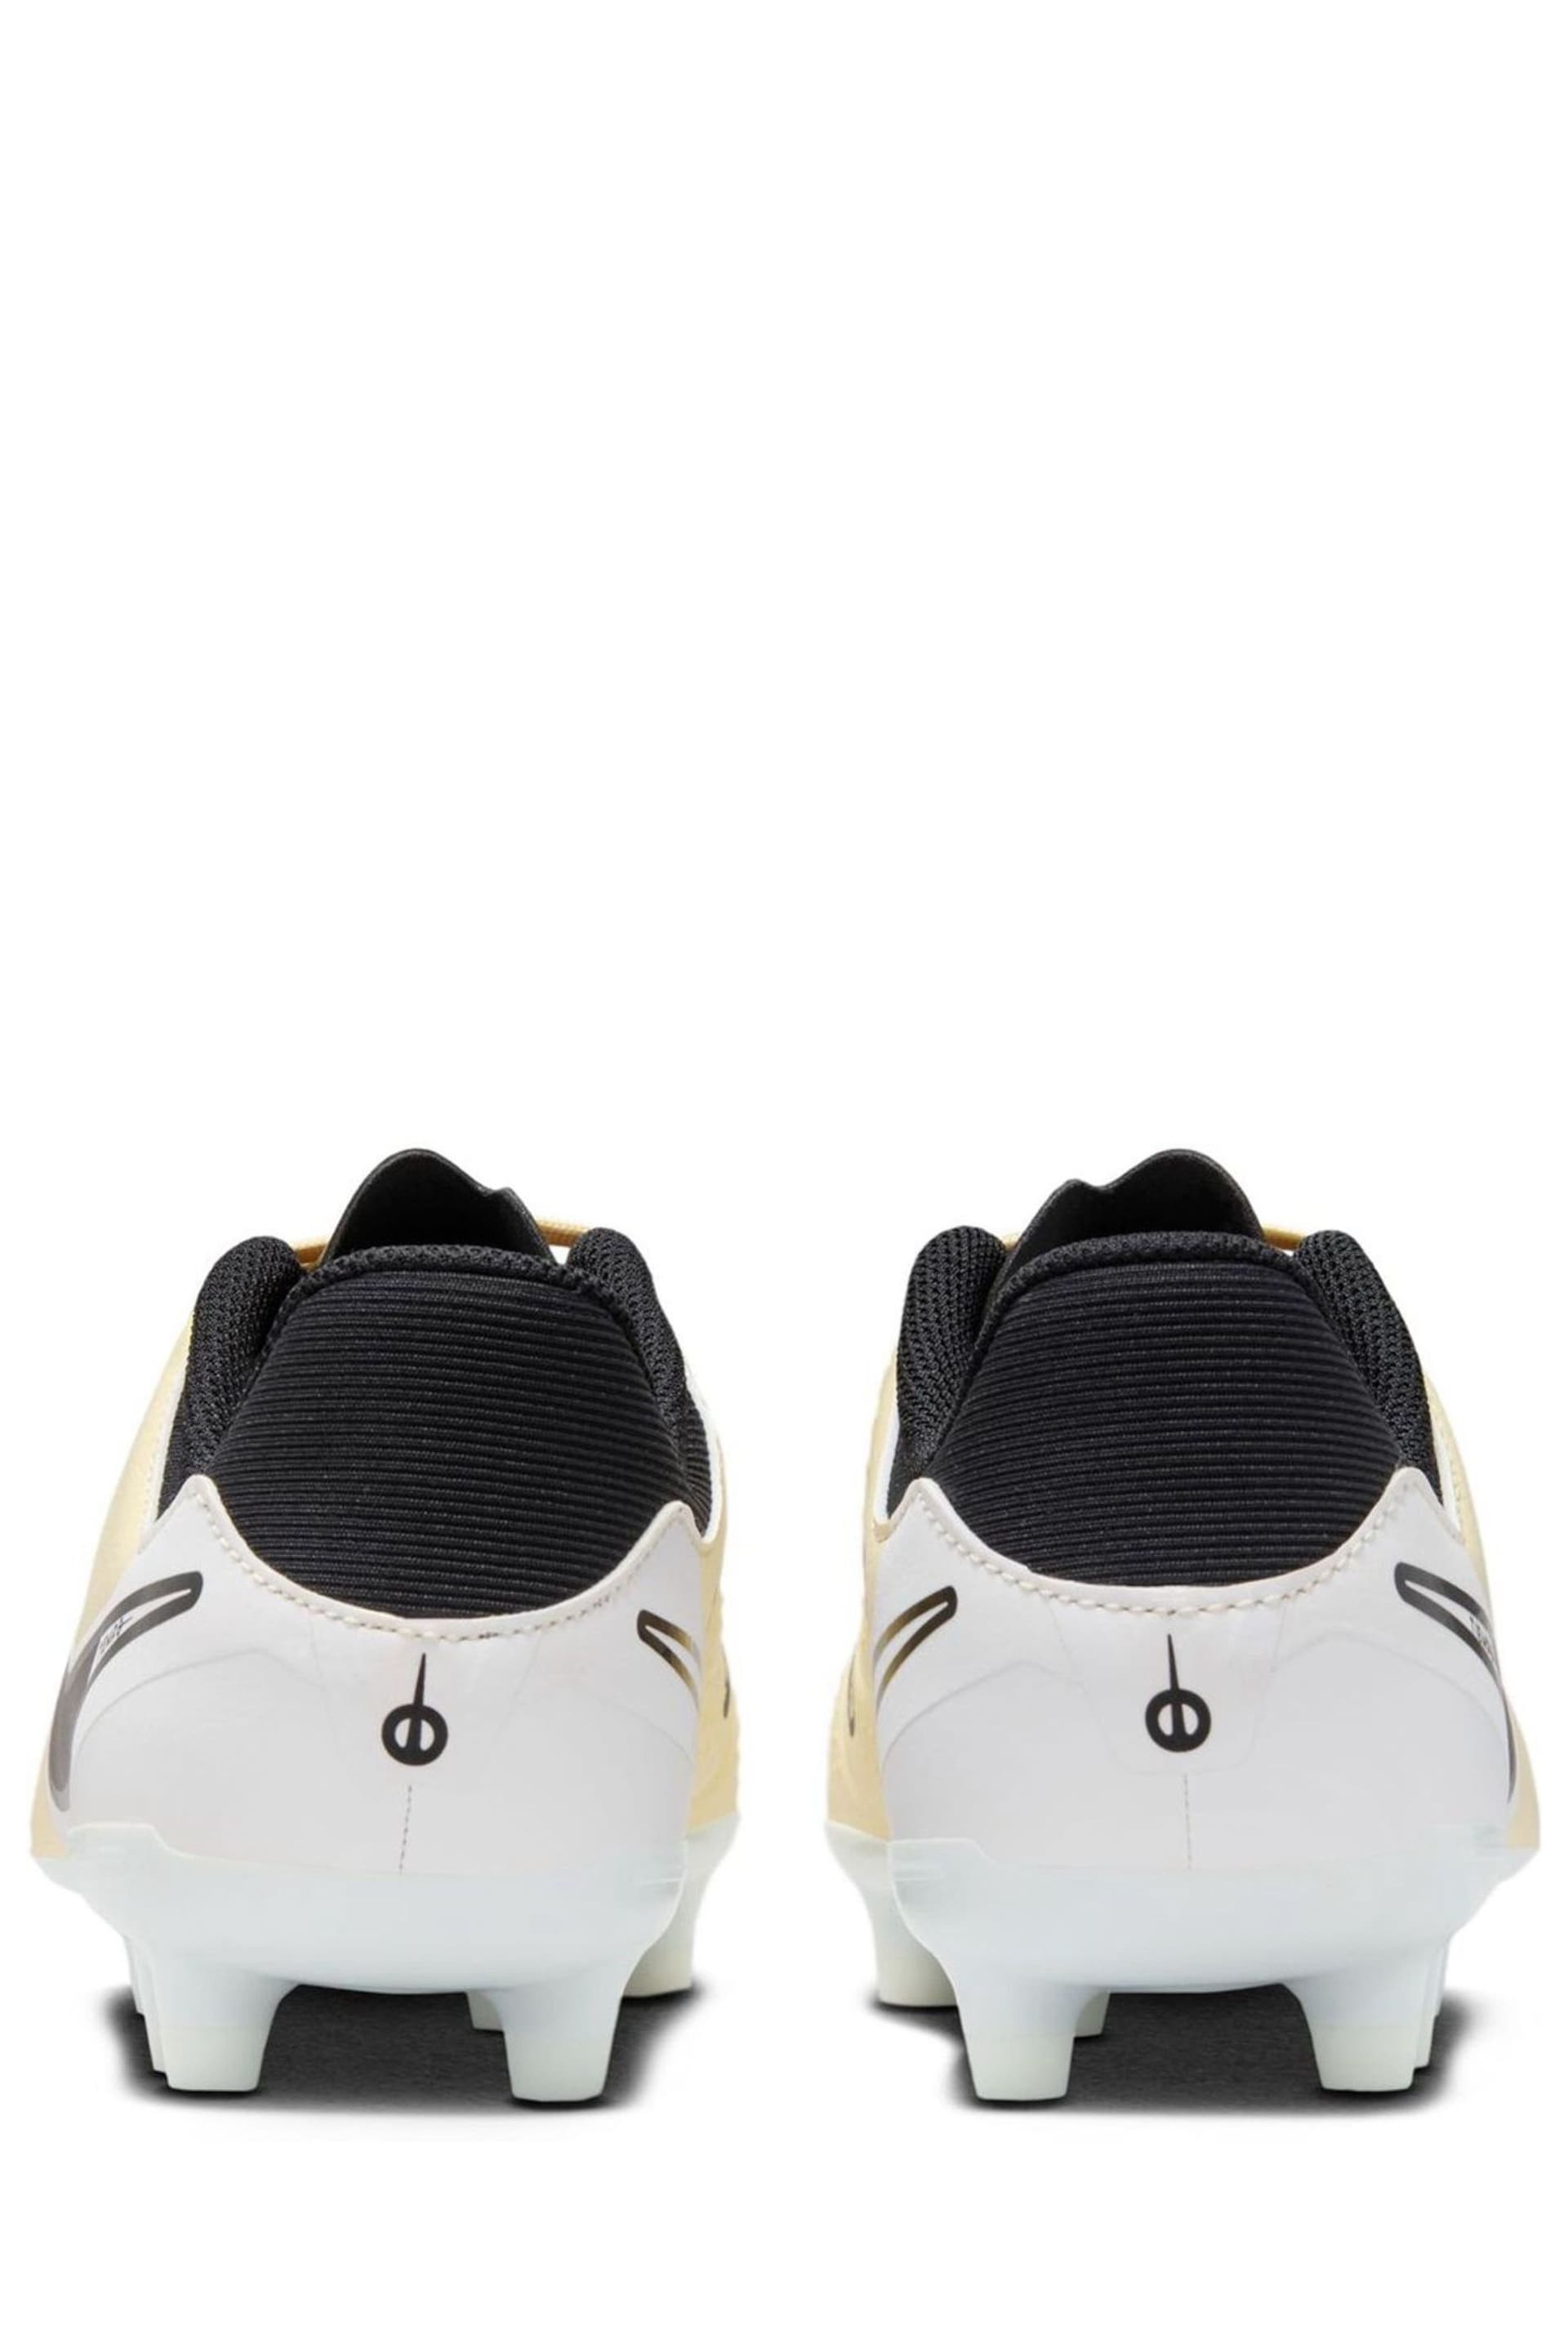 Nike Yellow Jr. Tiempo Legend 10 Academy Multi Ground Football Boots - Image 6 of 11